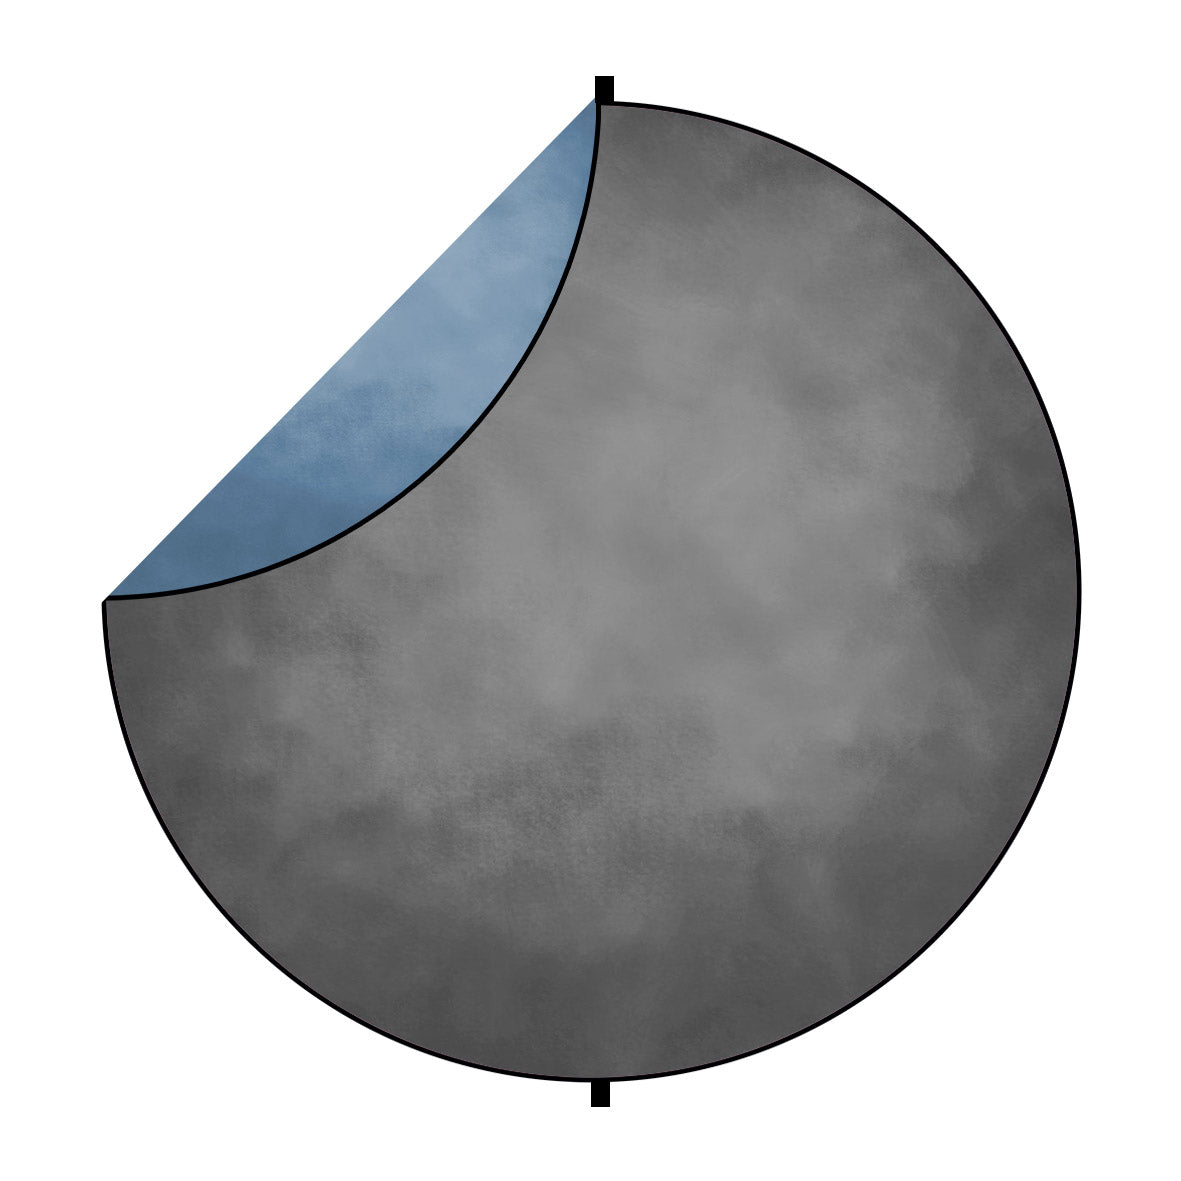 Fox Abstract Blue/Gray Collapsible Photography Backdrop 5x5ft(1.5x1.5m) - Foxbackdrop